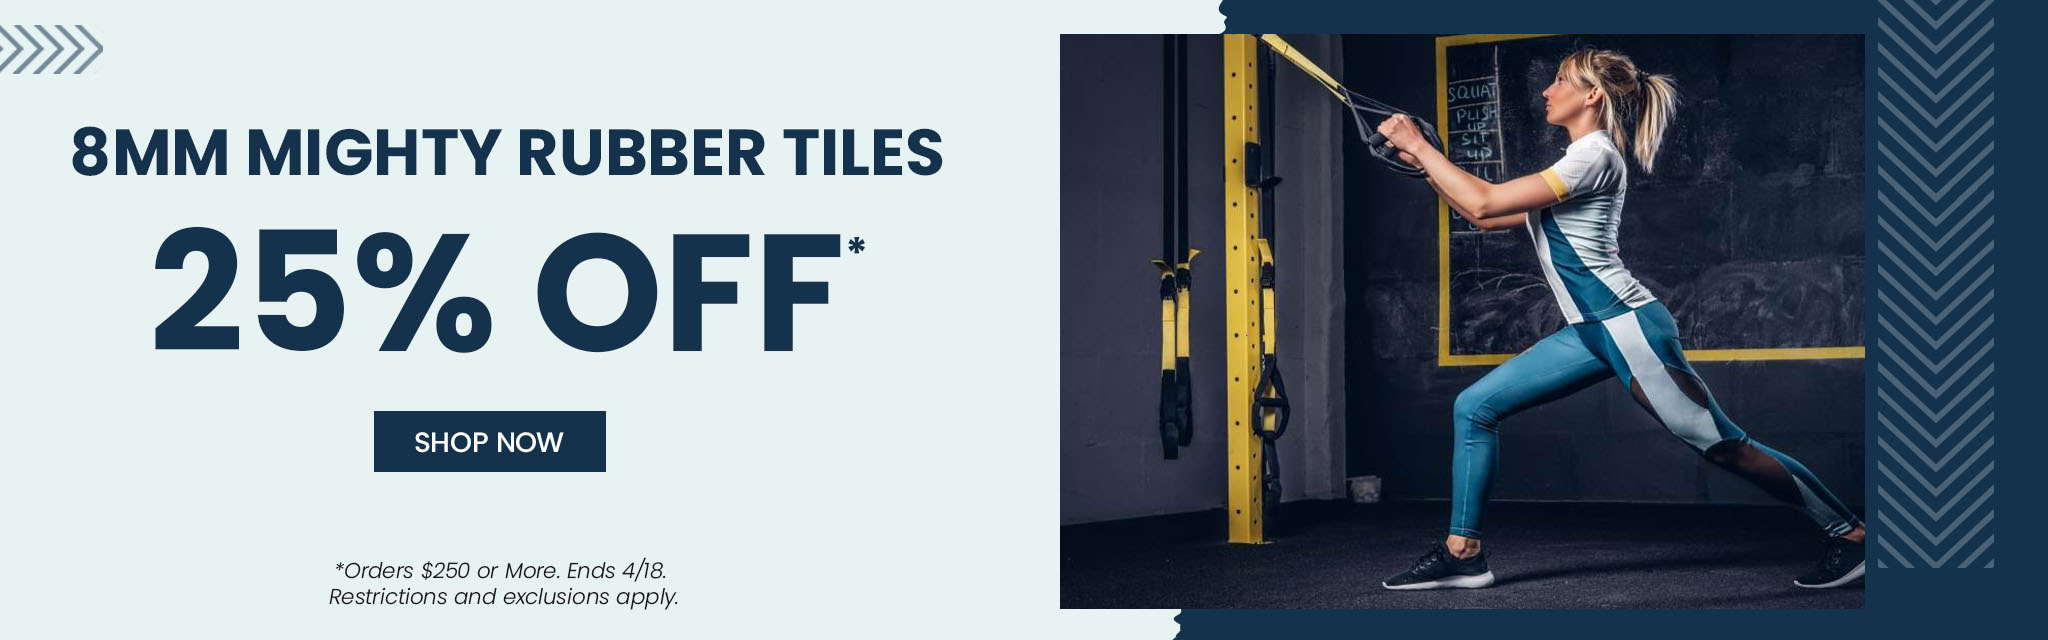 8mm Mighty Rubber Tiles. 25% Off. Shop Now. Orders $250 or More. Ends April 18th. Restrictions apply.